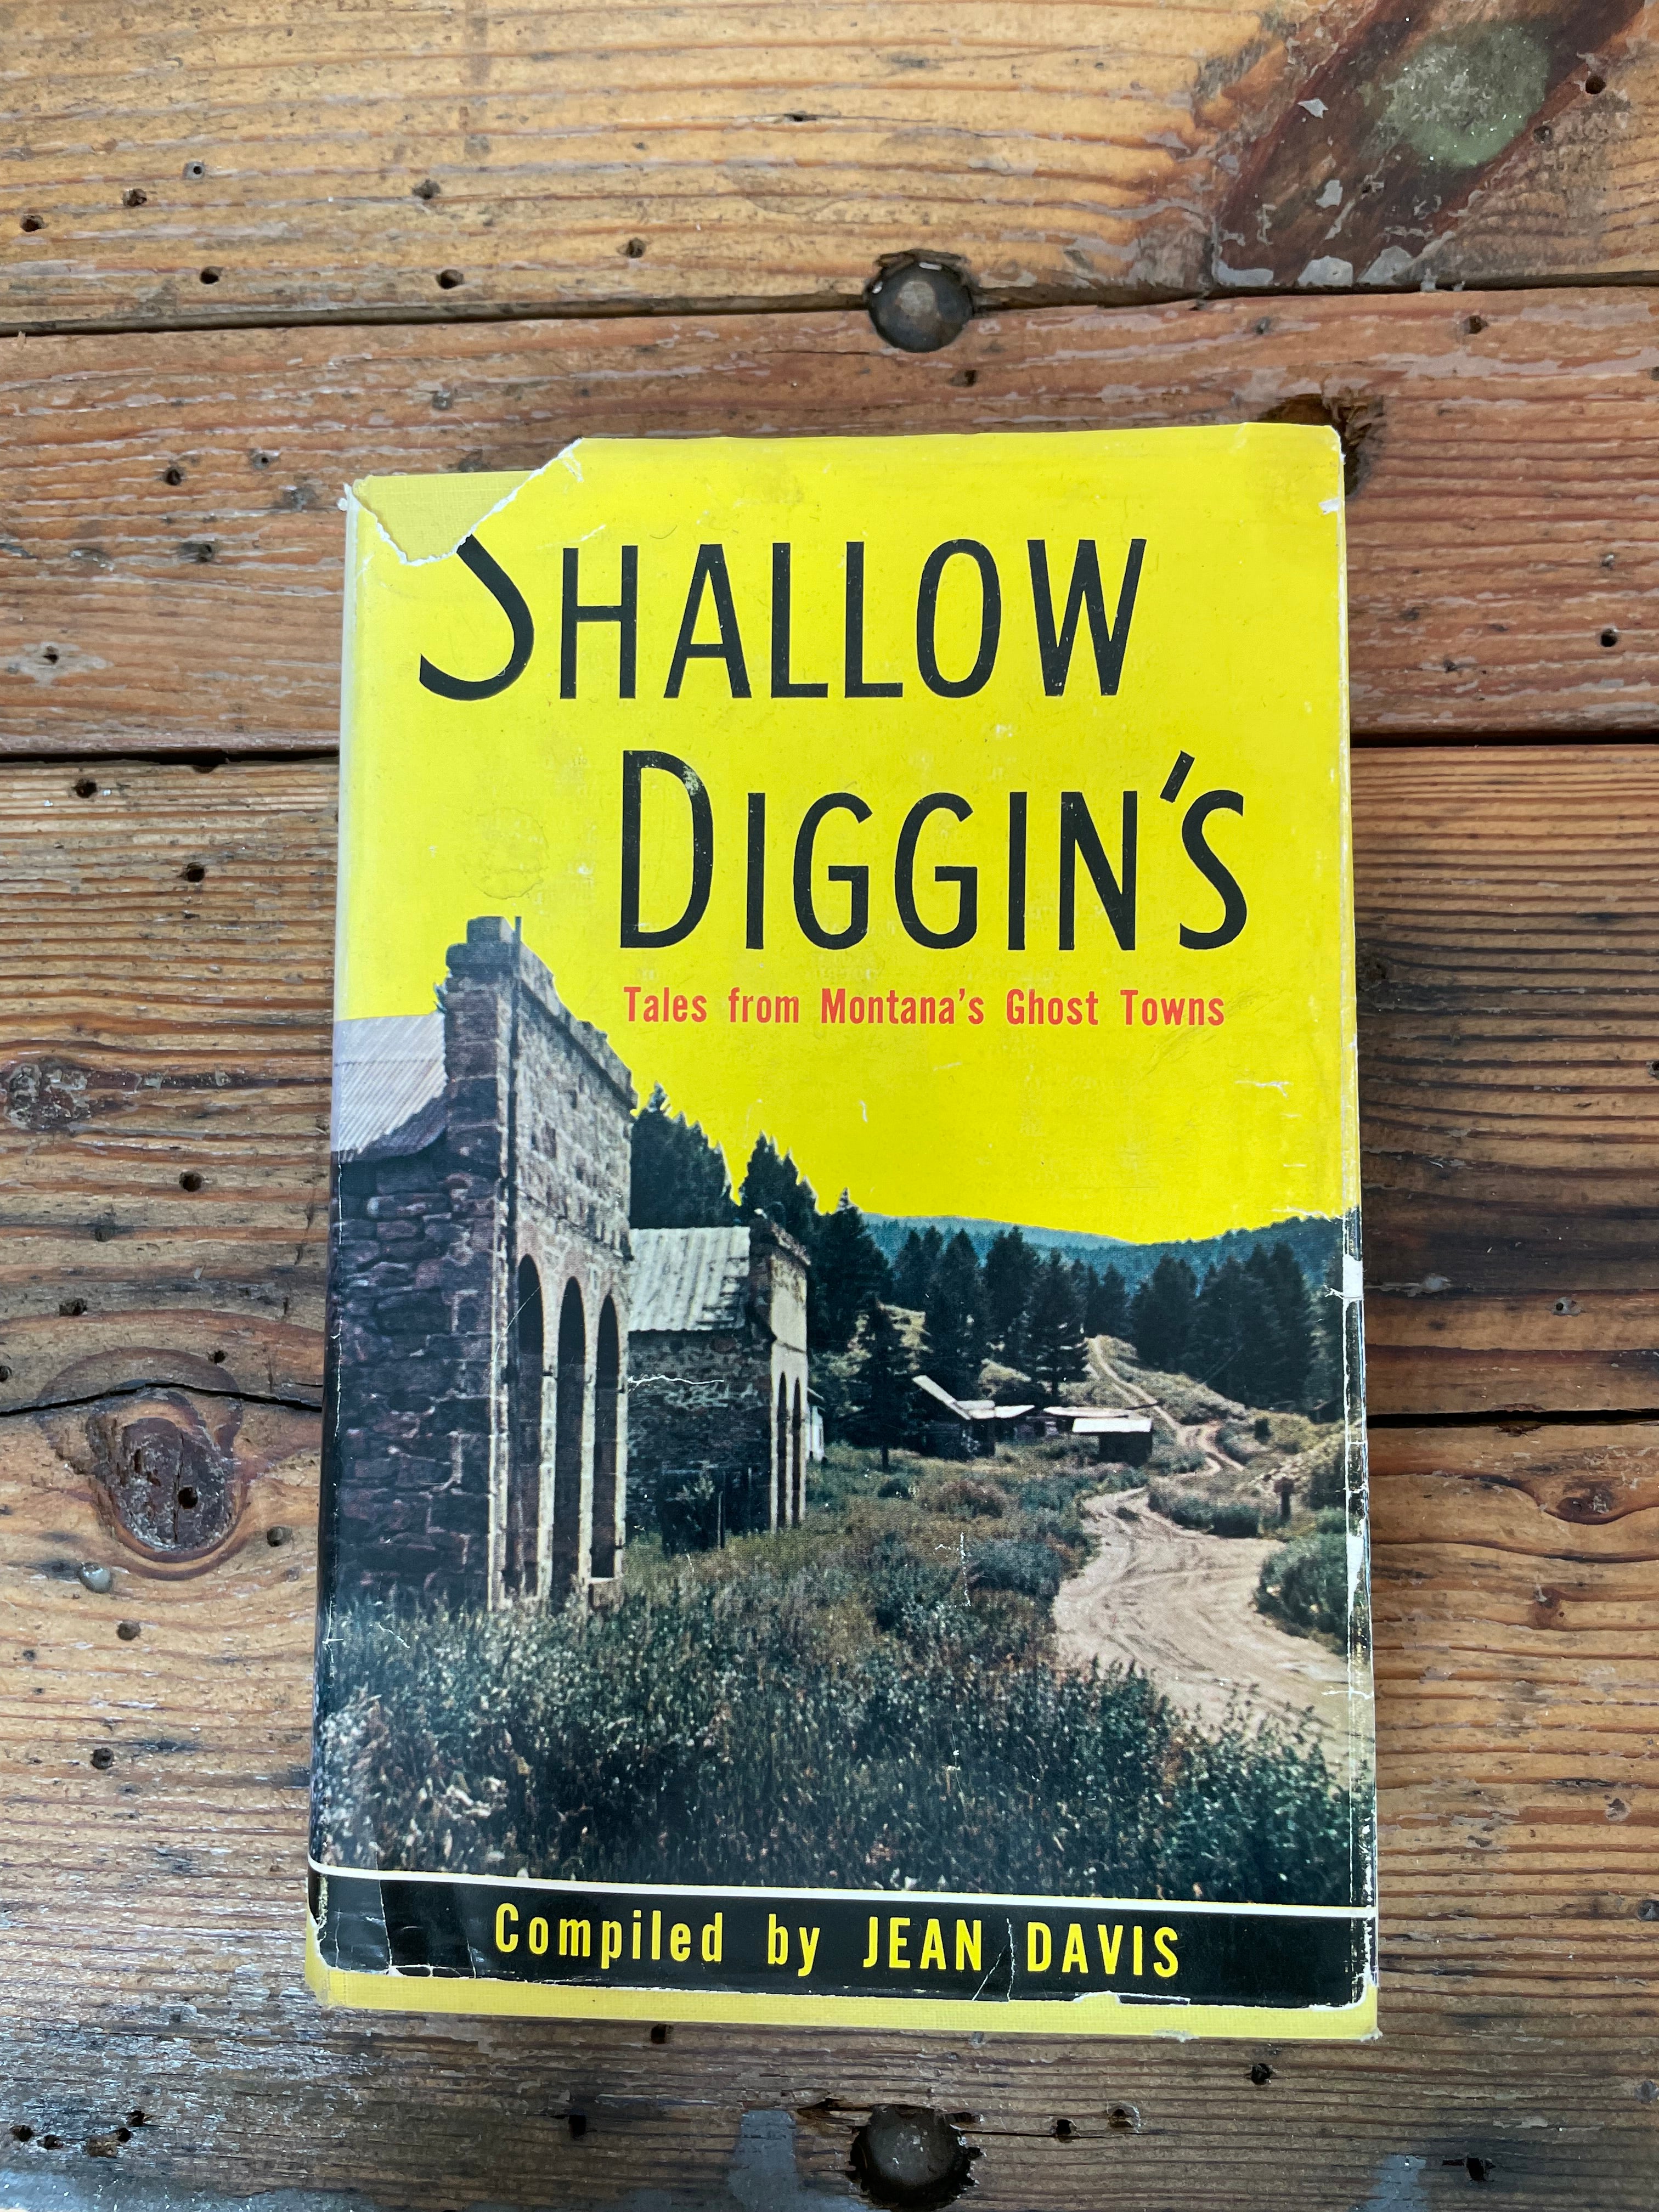 Shallow Diggin's: Tales from Montana's Ghost Towns